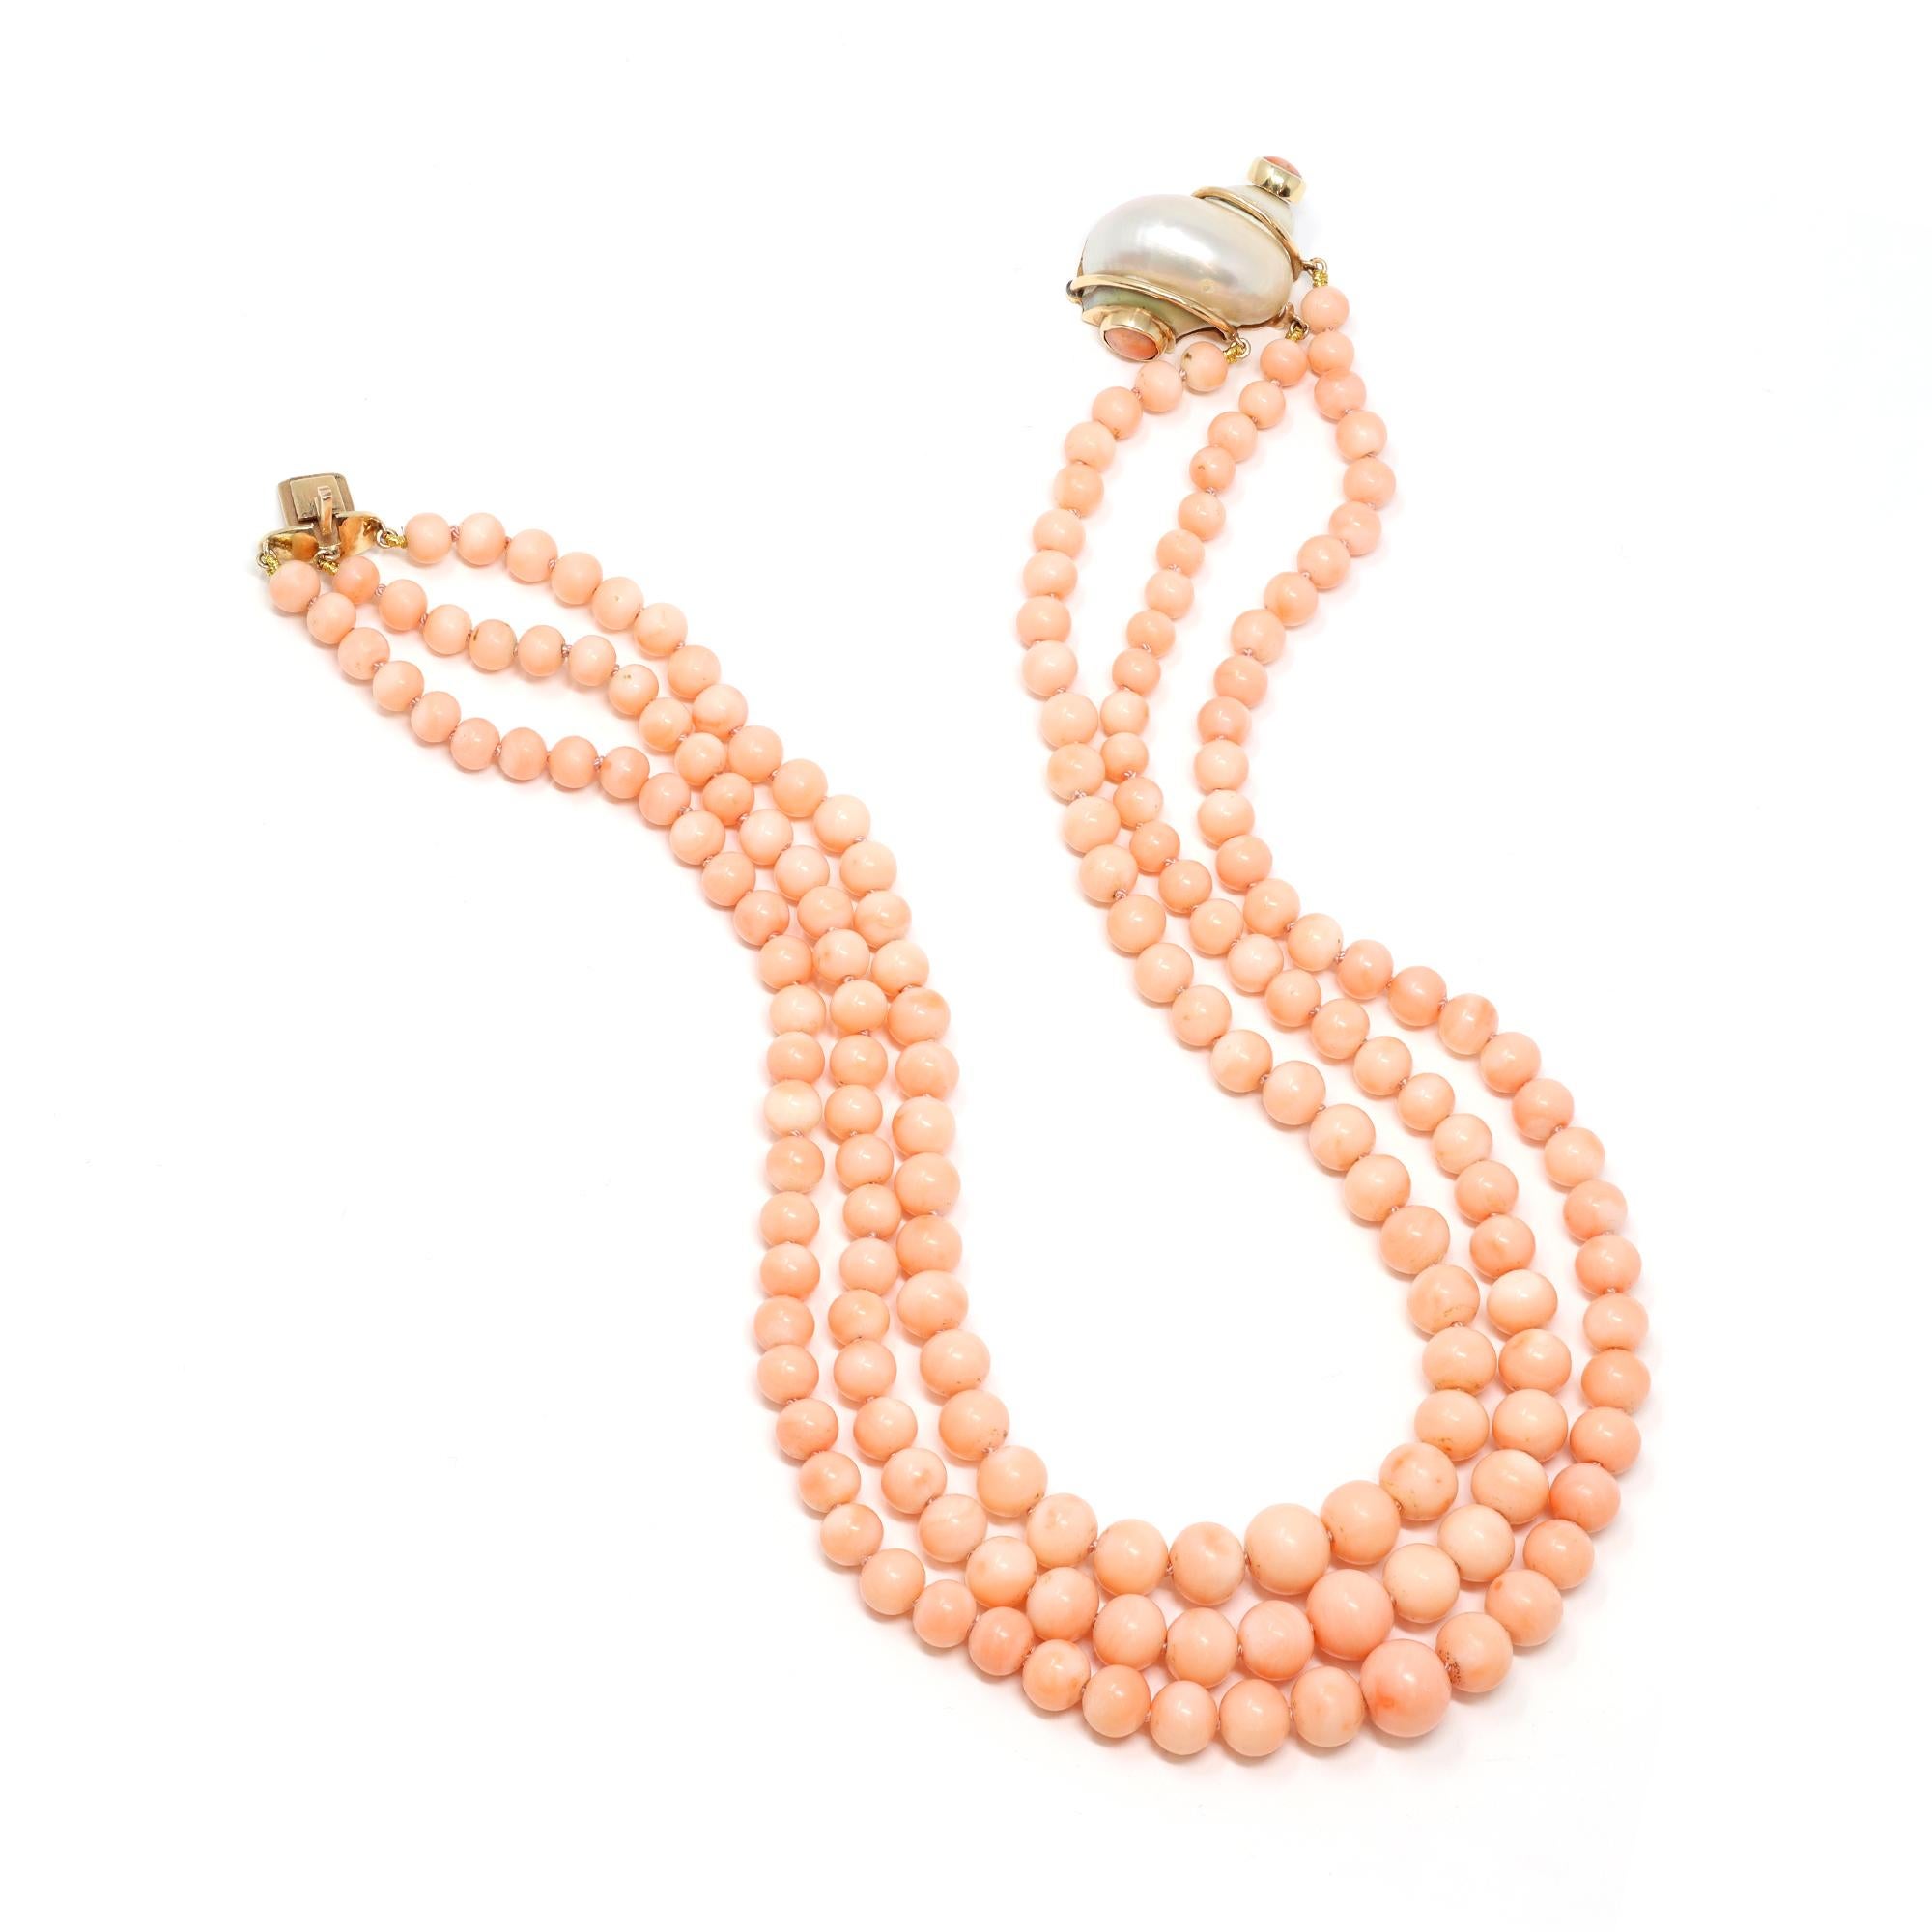 An original vintage and rare coral necklace featuring angel skin coral beads, set as triple strands, with a unique shell clasp displaying matching coral cabochon on both ends. The coral beads are natural with no indication of dye. The necklace has a